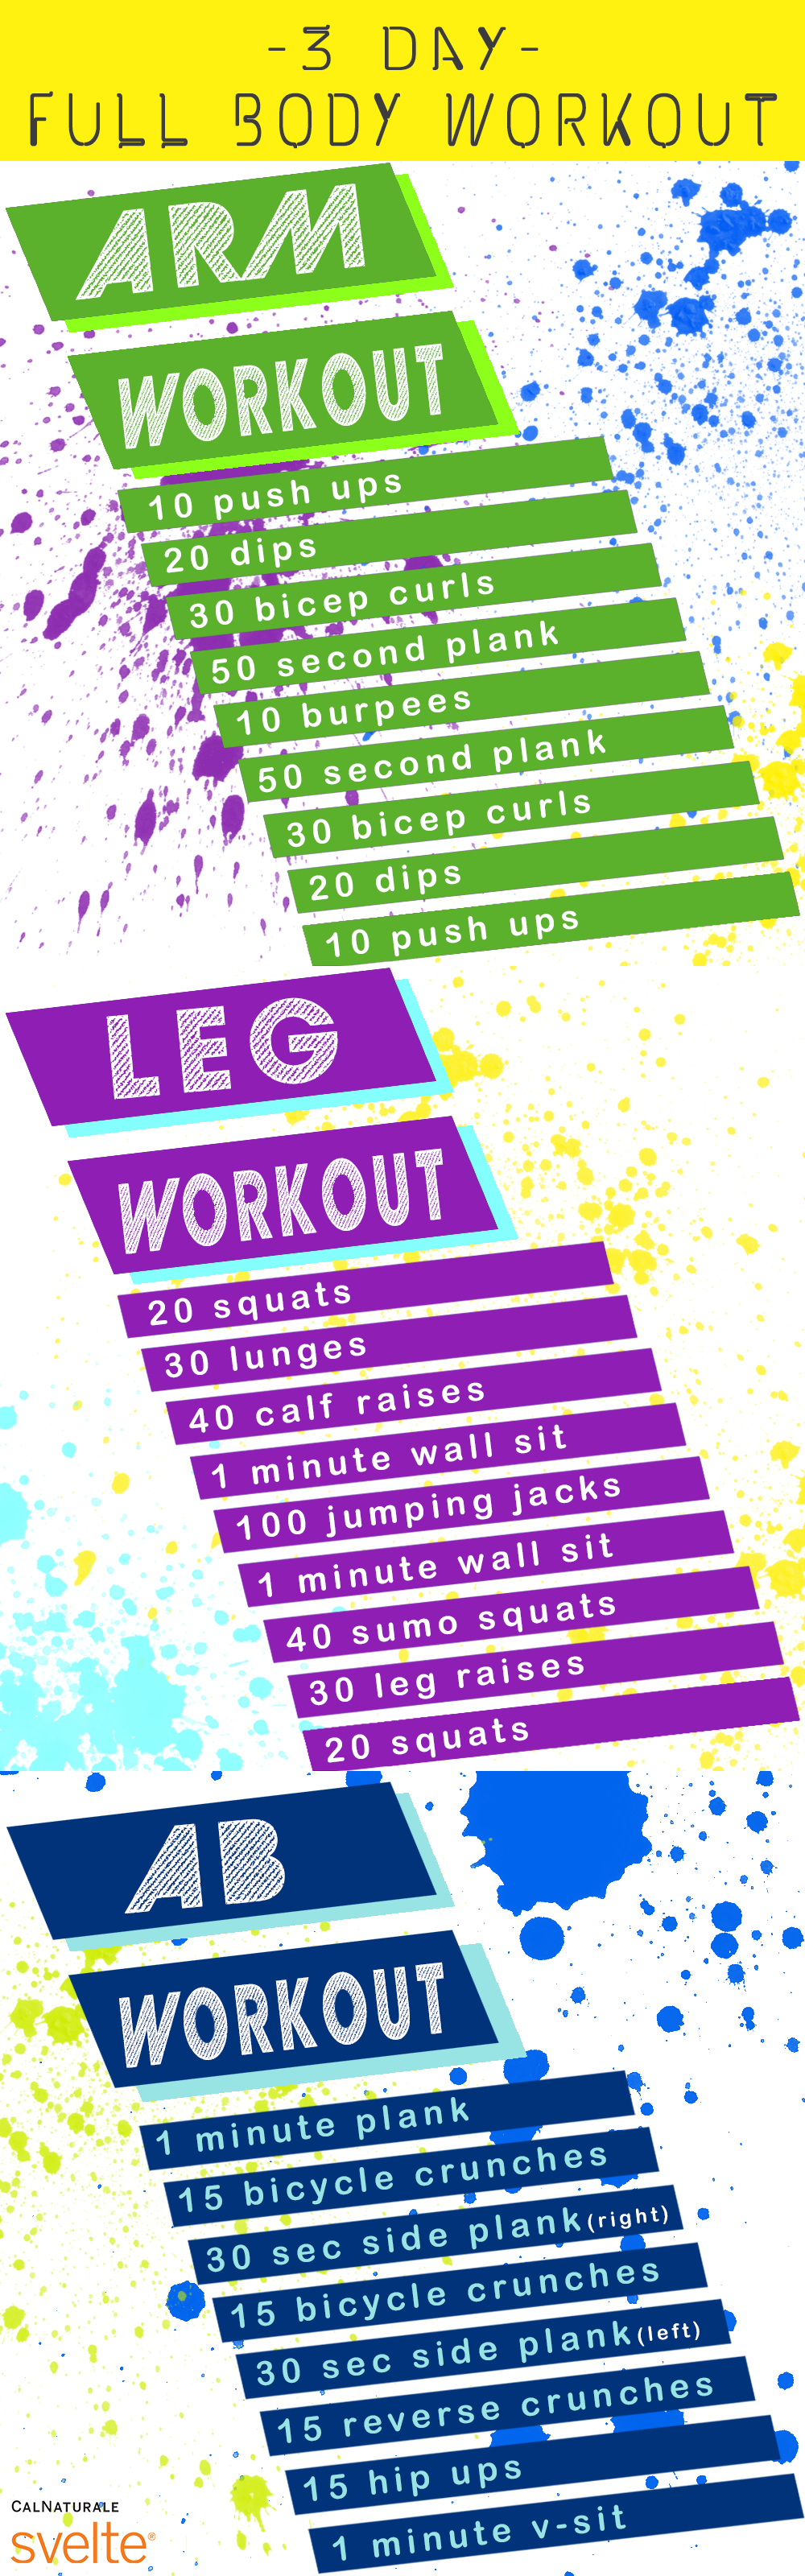 Use this handy 3-day whole body workout program to tone your arms, legs, and abs! #FitnessFriday